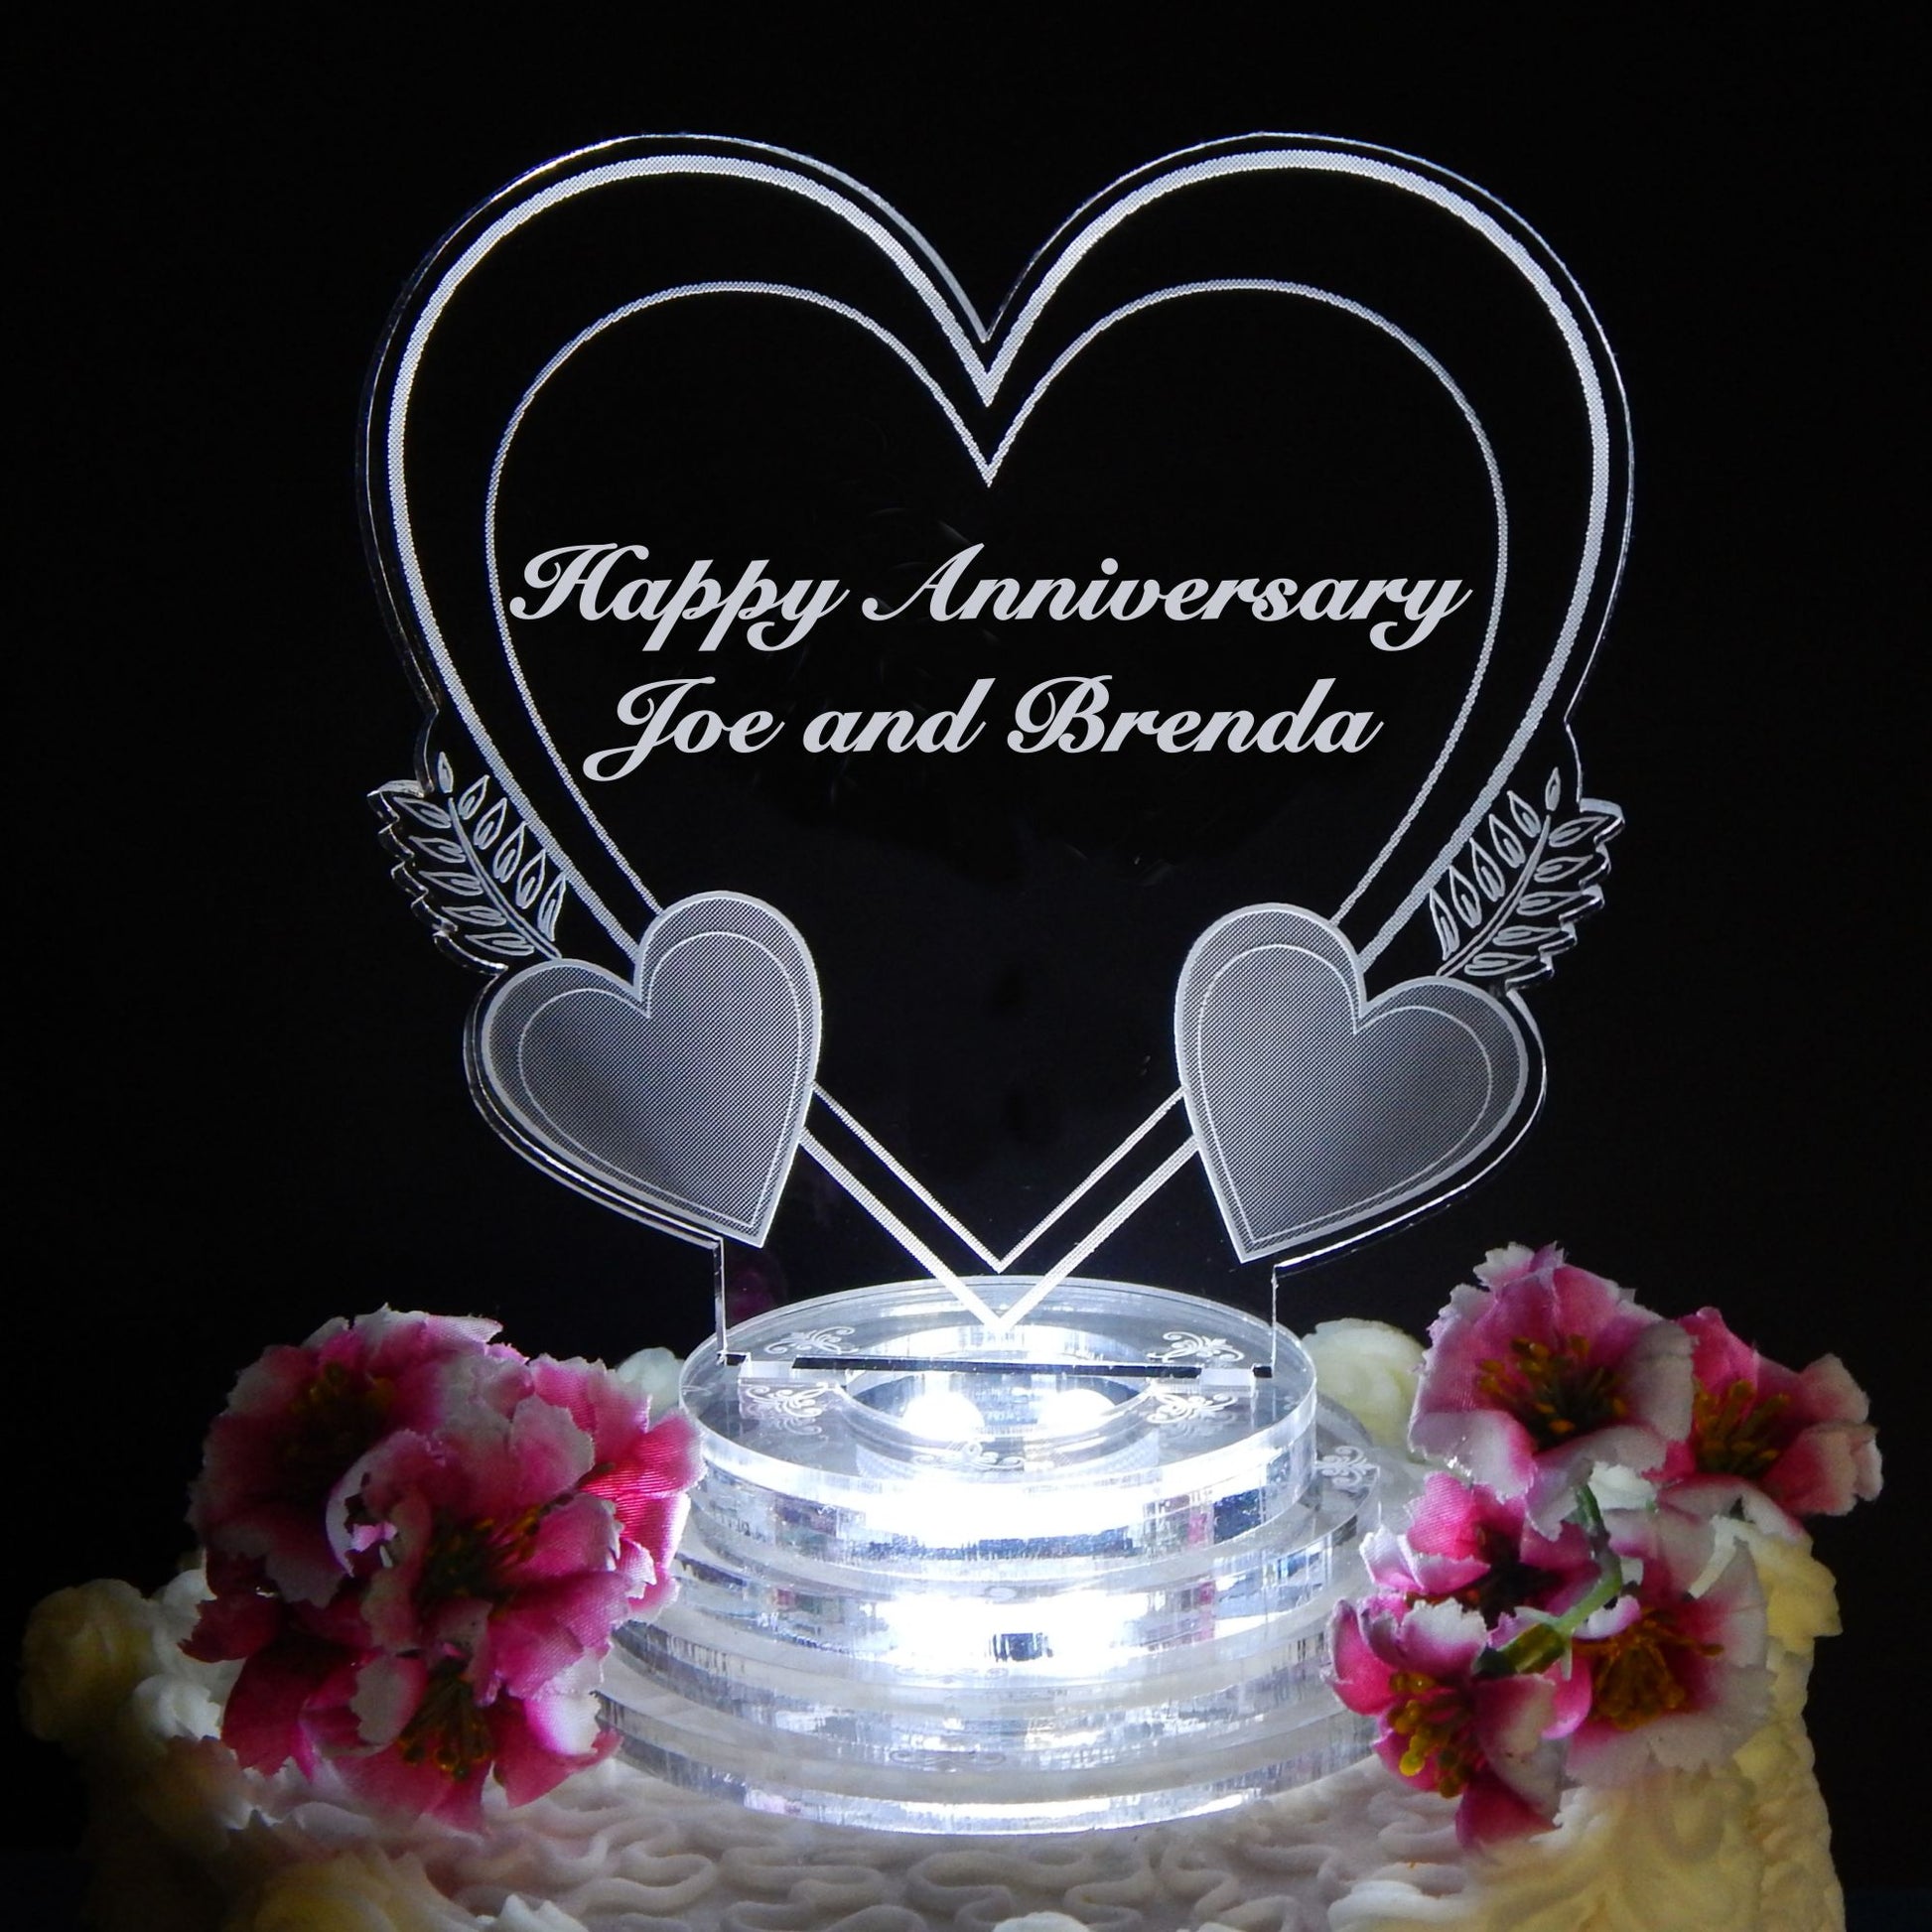 Heart shaped acrylic cake topper engraved with Happy Anniversary and names